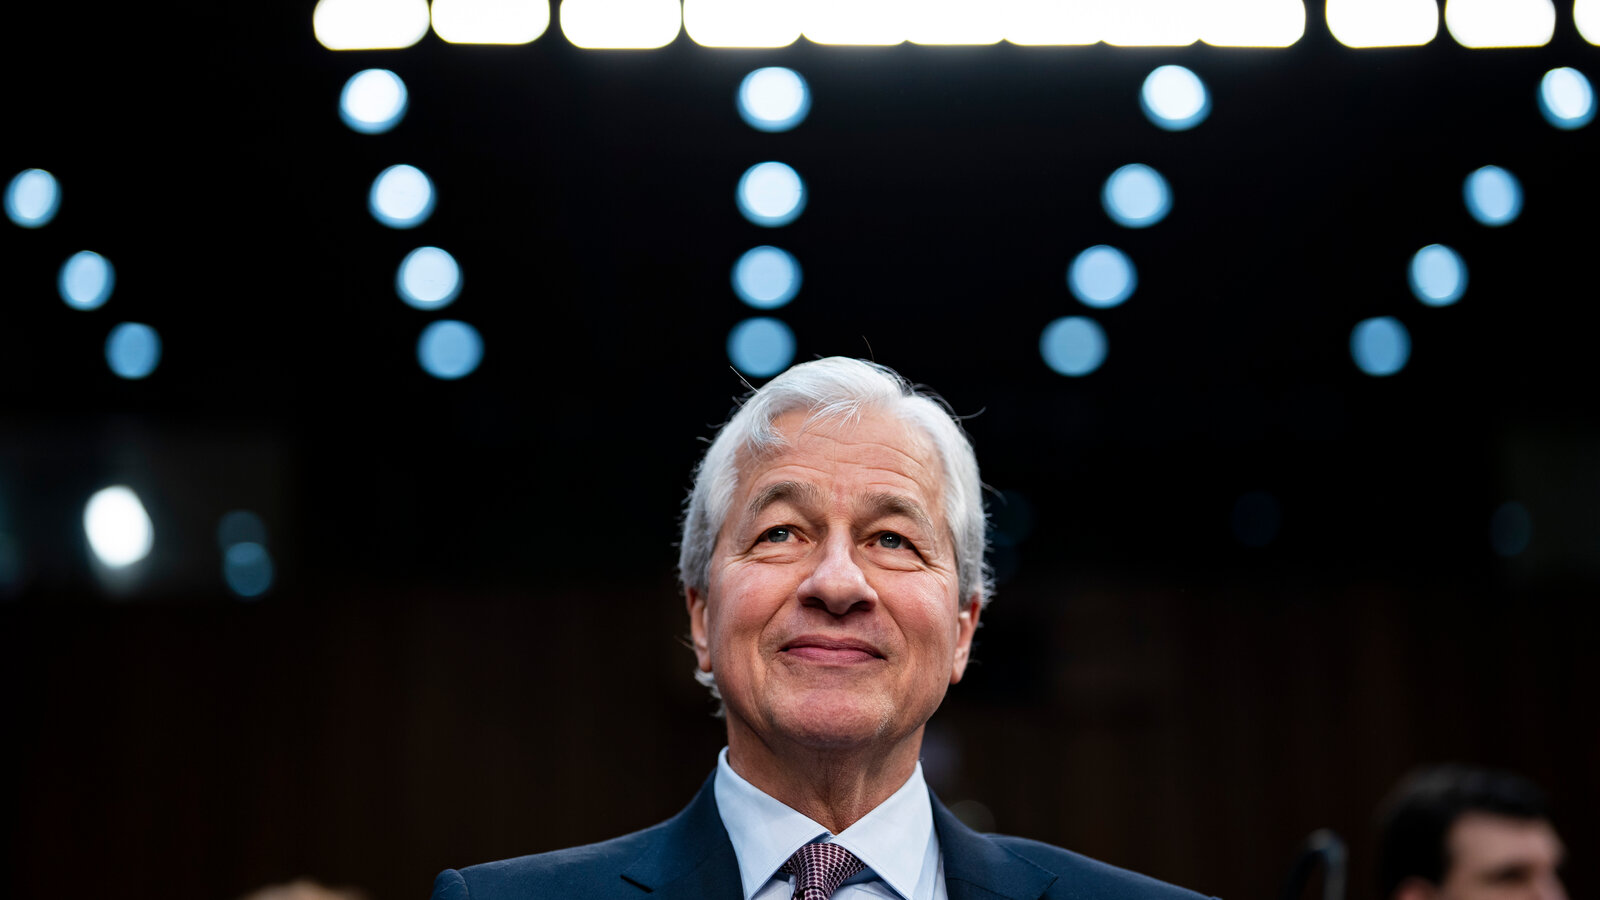 JPMorgan Chase CEO Jamie Dimon Predicts Tough Times Ahead As Millions Will Suffer Due to Stagflation